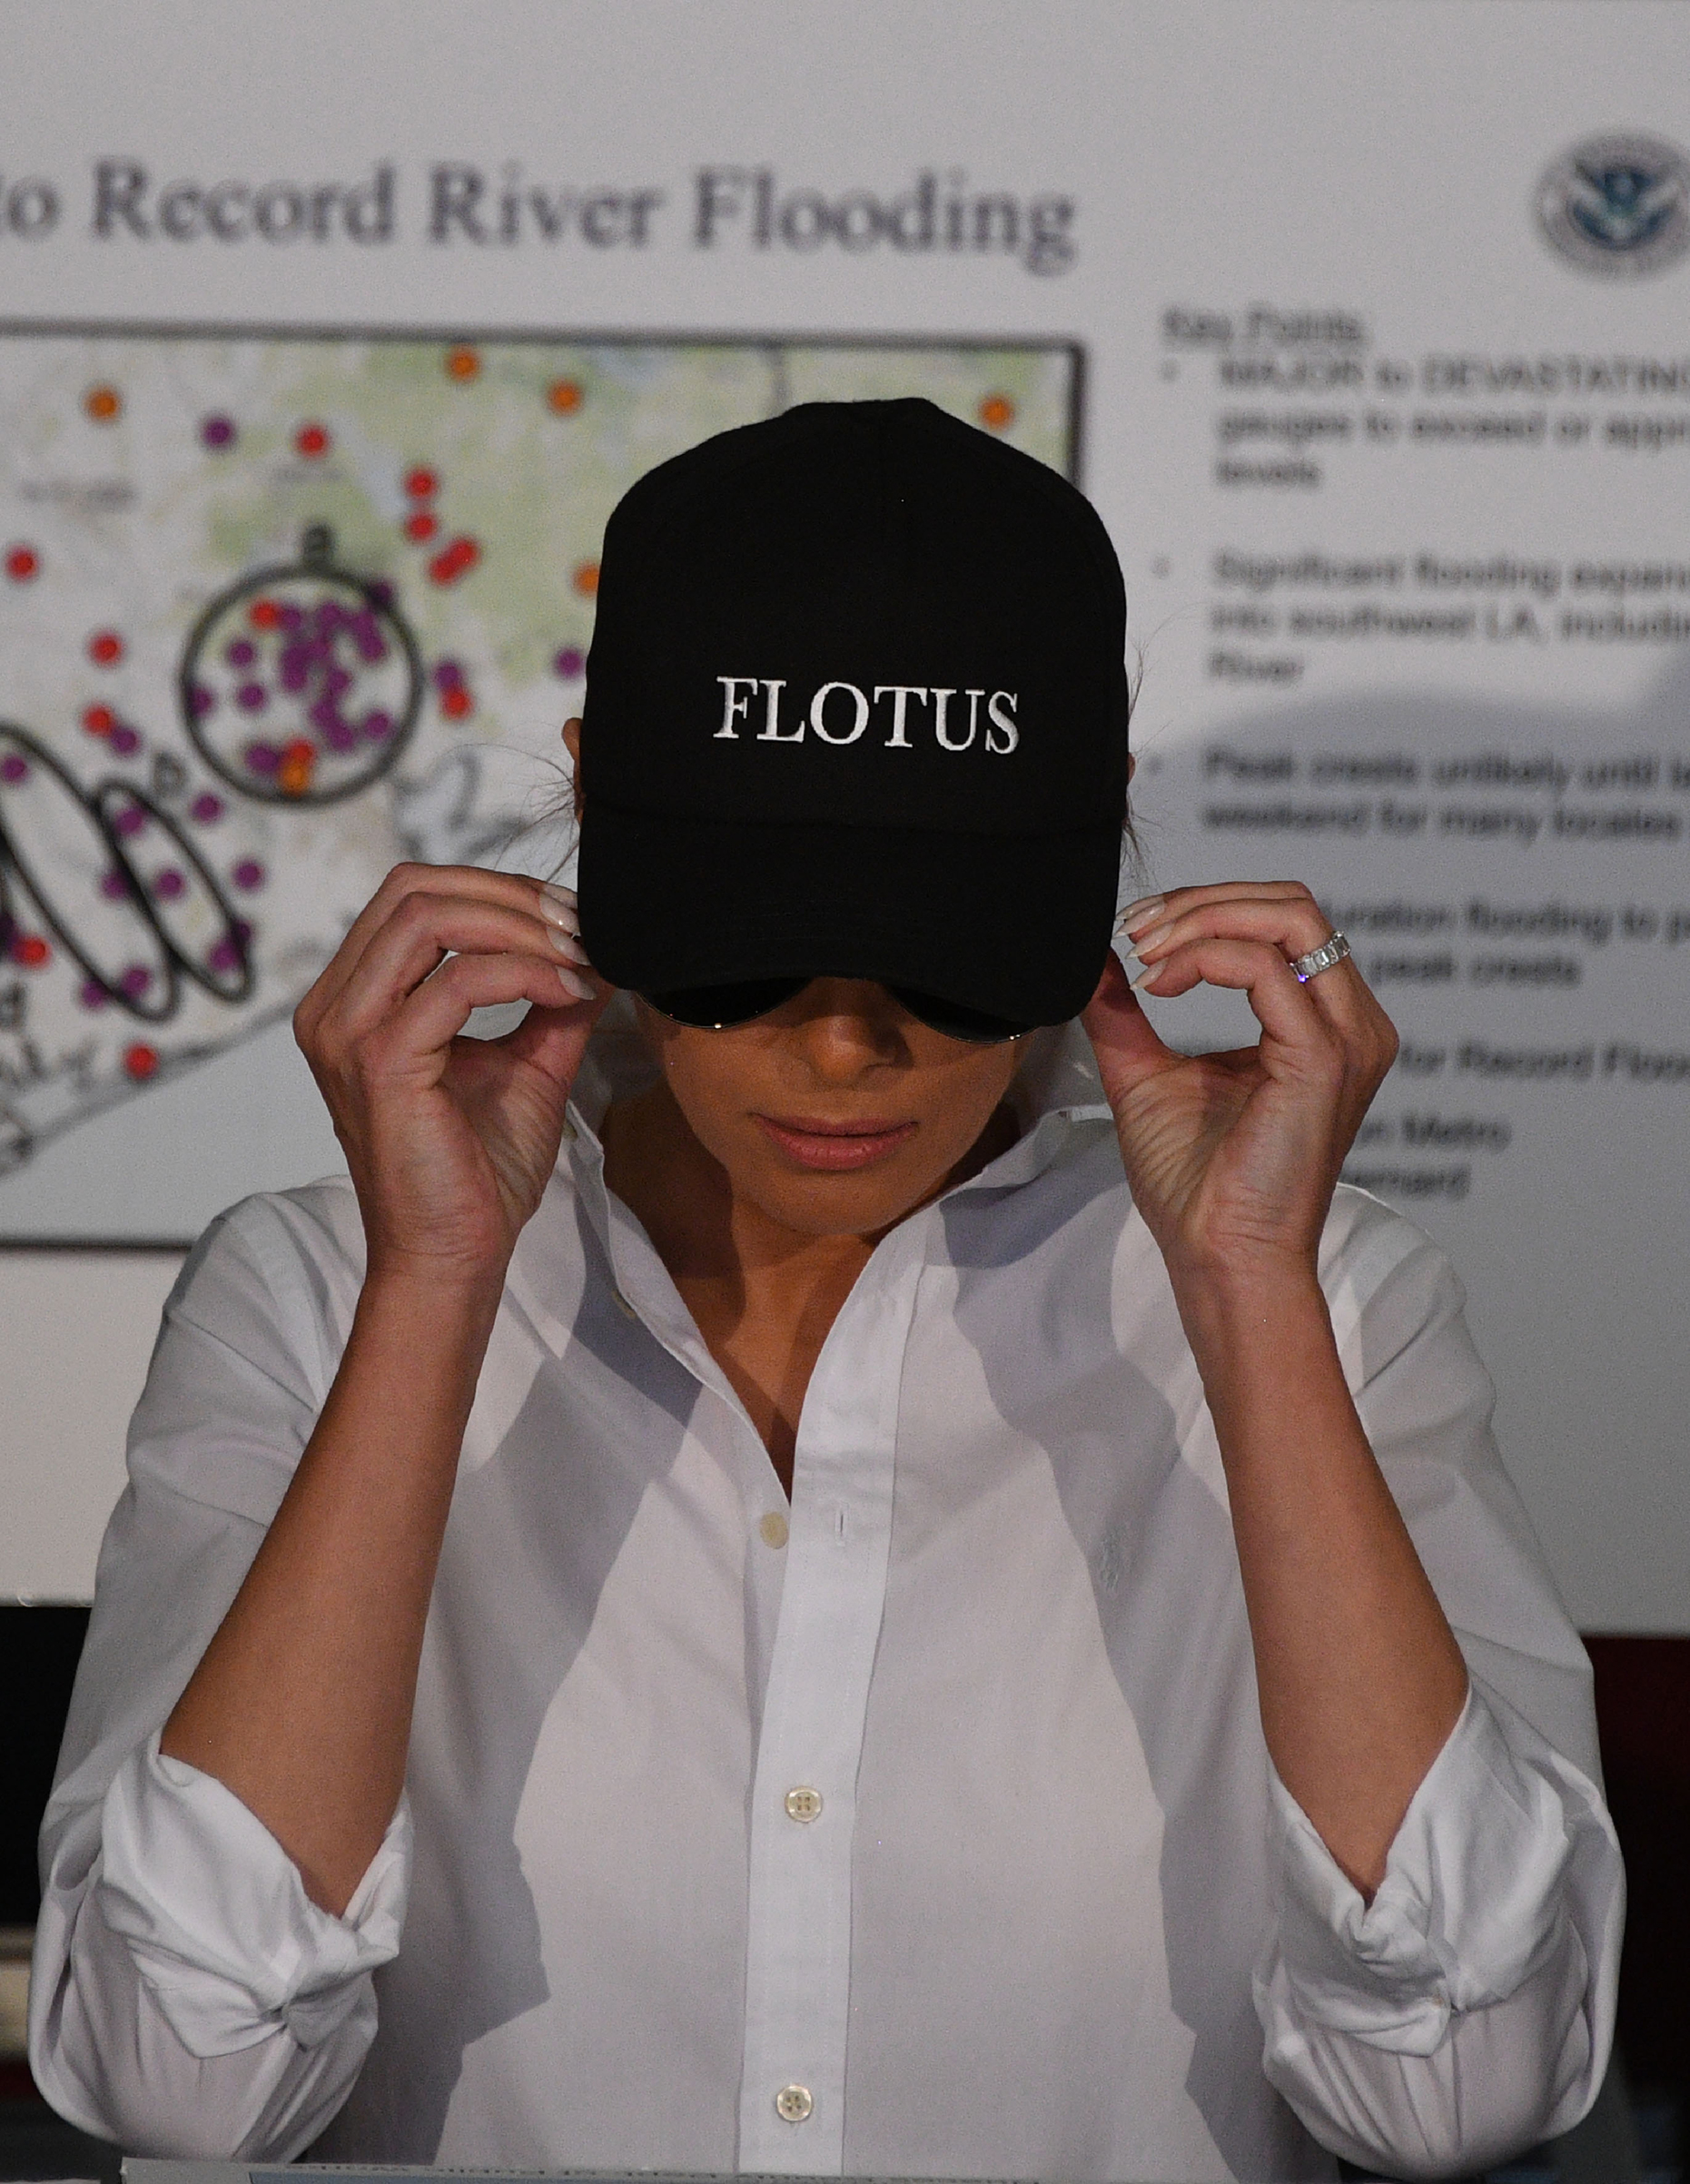 First lady Melania Trump wearing a cap that says "FLOTUS" listens during a firehouse briefing on Hurricane Harvey in Corpus Christi, Texas on Aug. 29, 2017.